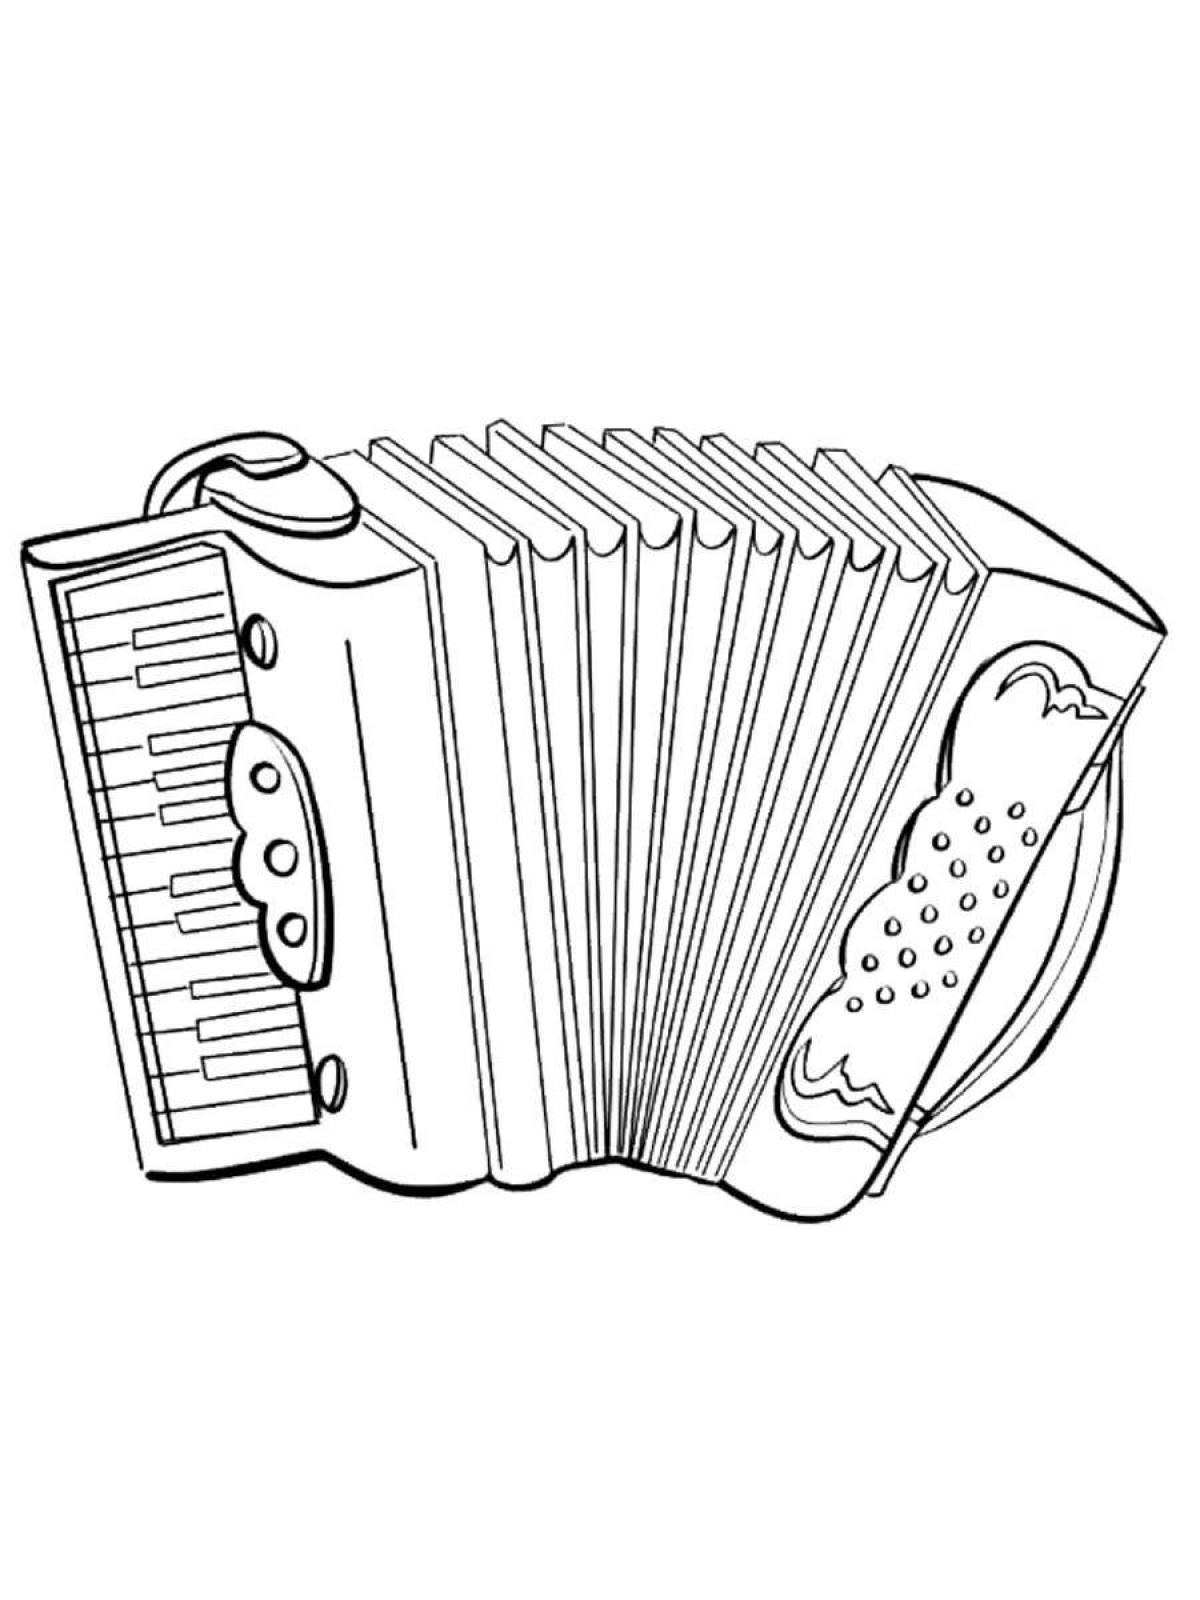 Artistic accordion musical instruments for young people with labels